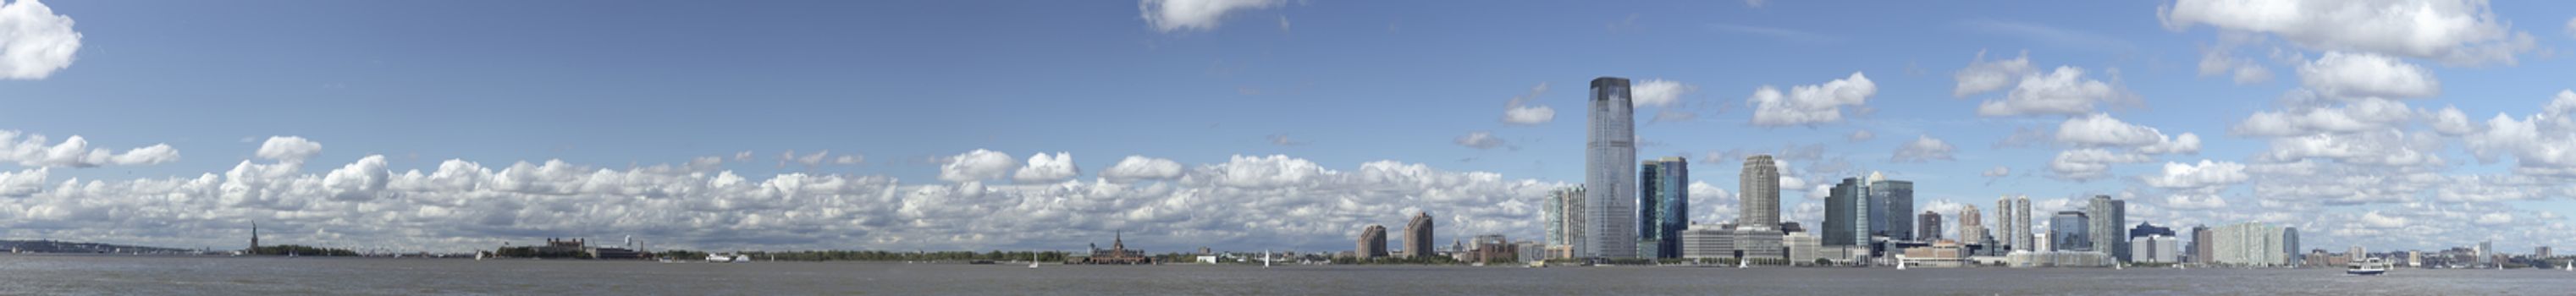 New Jersey panorama, Statue of Liberty and river Hudson HiRes